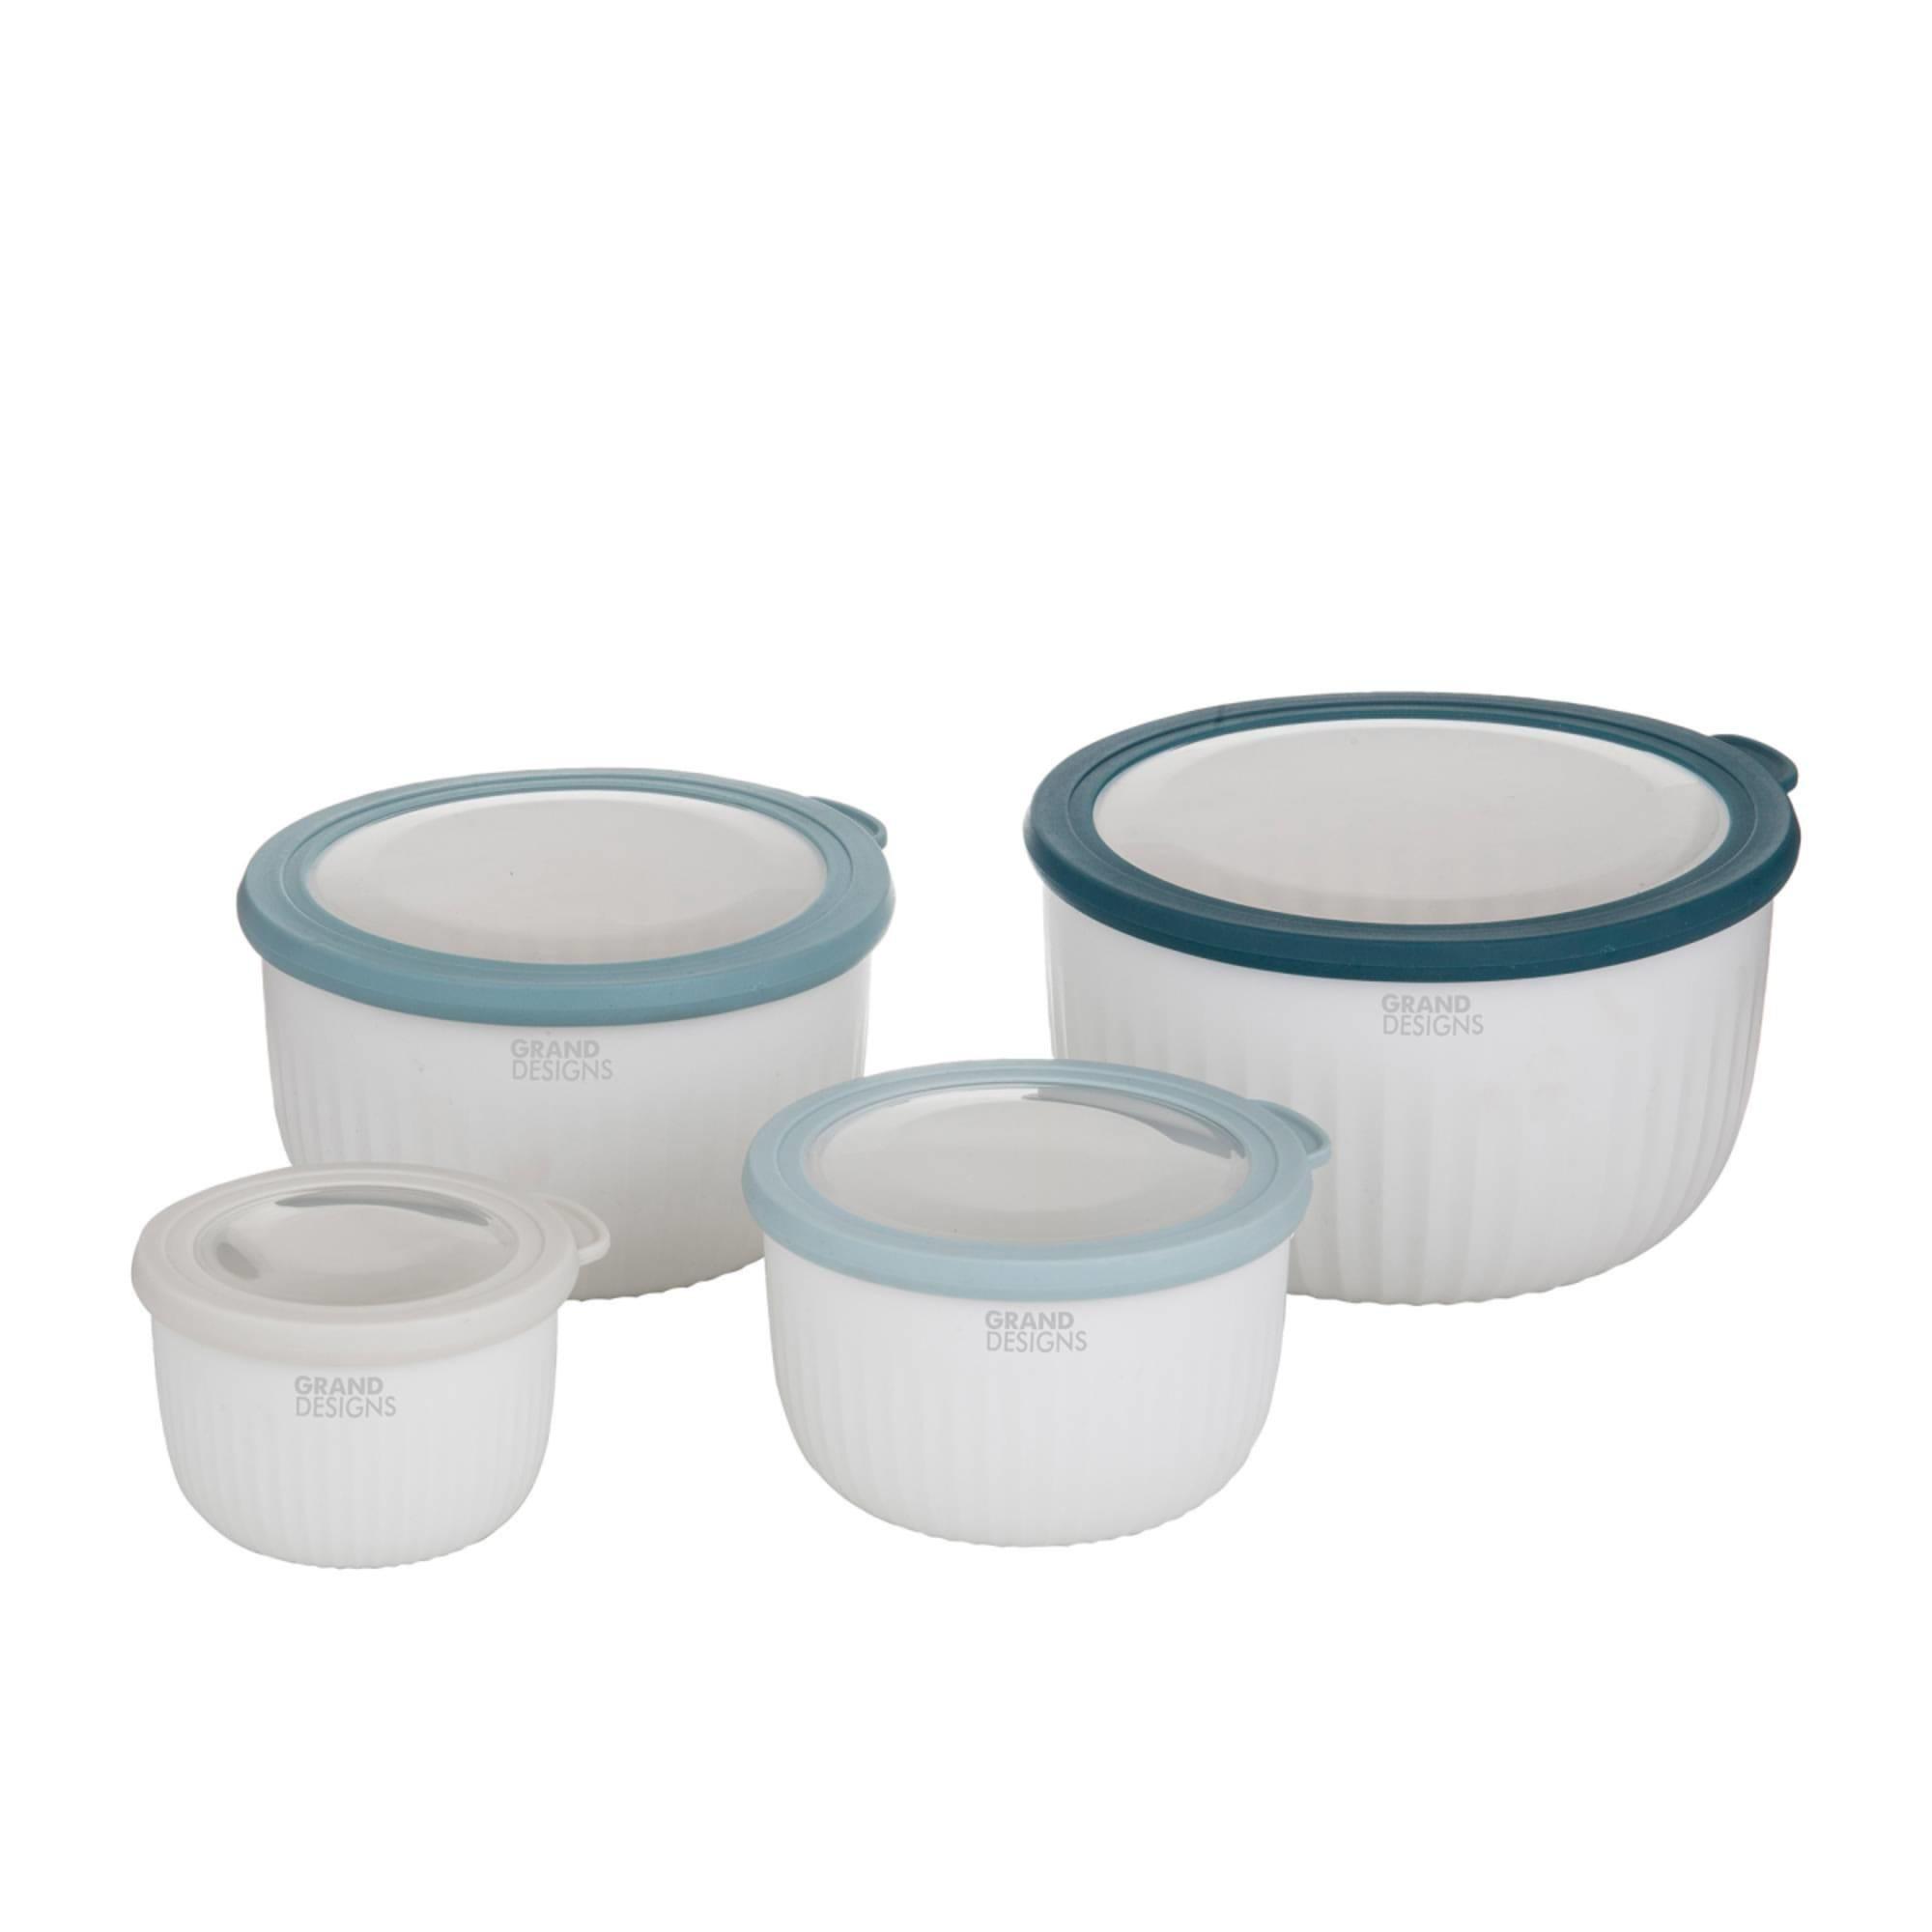 Grand Designs Stack & Store Bowls Set of 4 White/Grey/Green Image 1